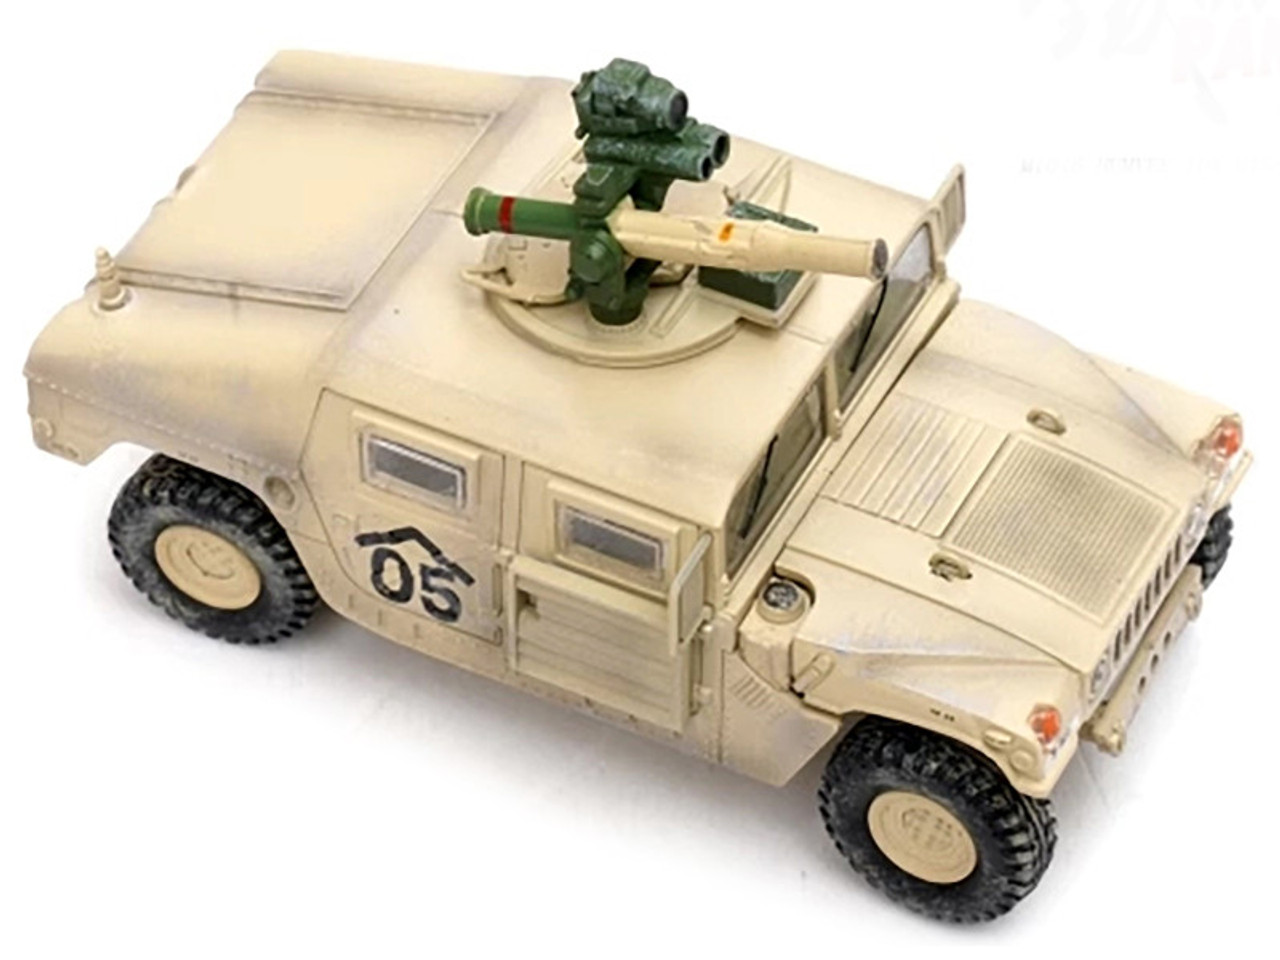 M1046 HUMVEE Tow Missile Carrier Desert Camouflage "E Troop 9th Regiment 2nd Brigade Combat Team 3rd Infantry Division (Mechanized) Iraq" (2003) "Military Miniature" Series 1/64 Diecast Model by Panzerkampf